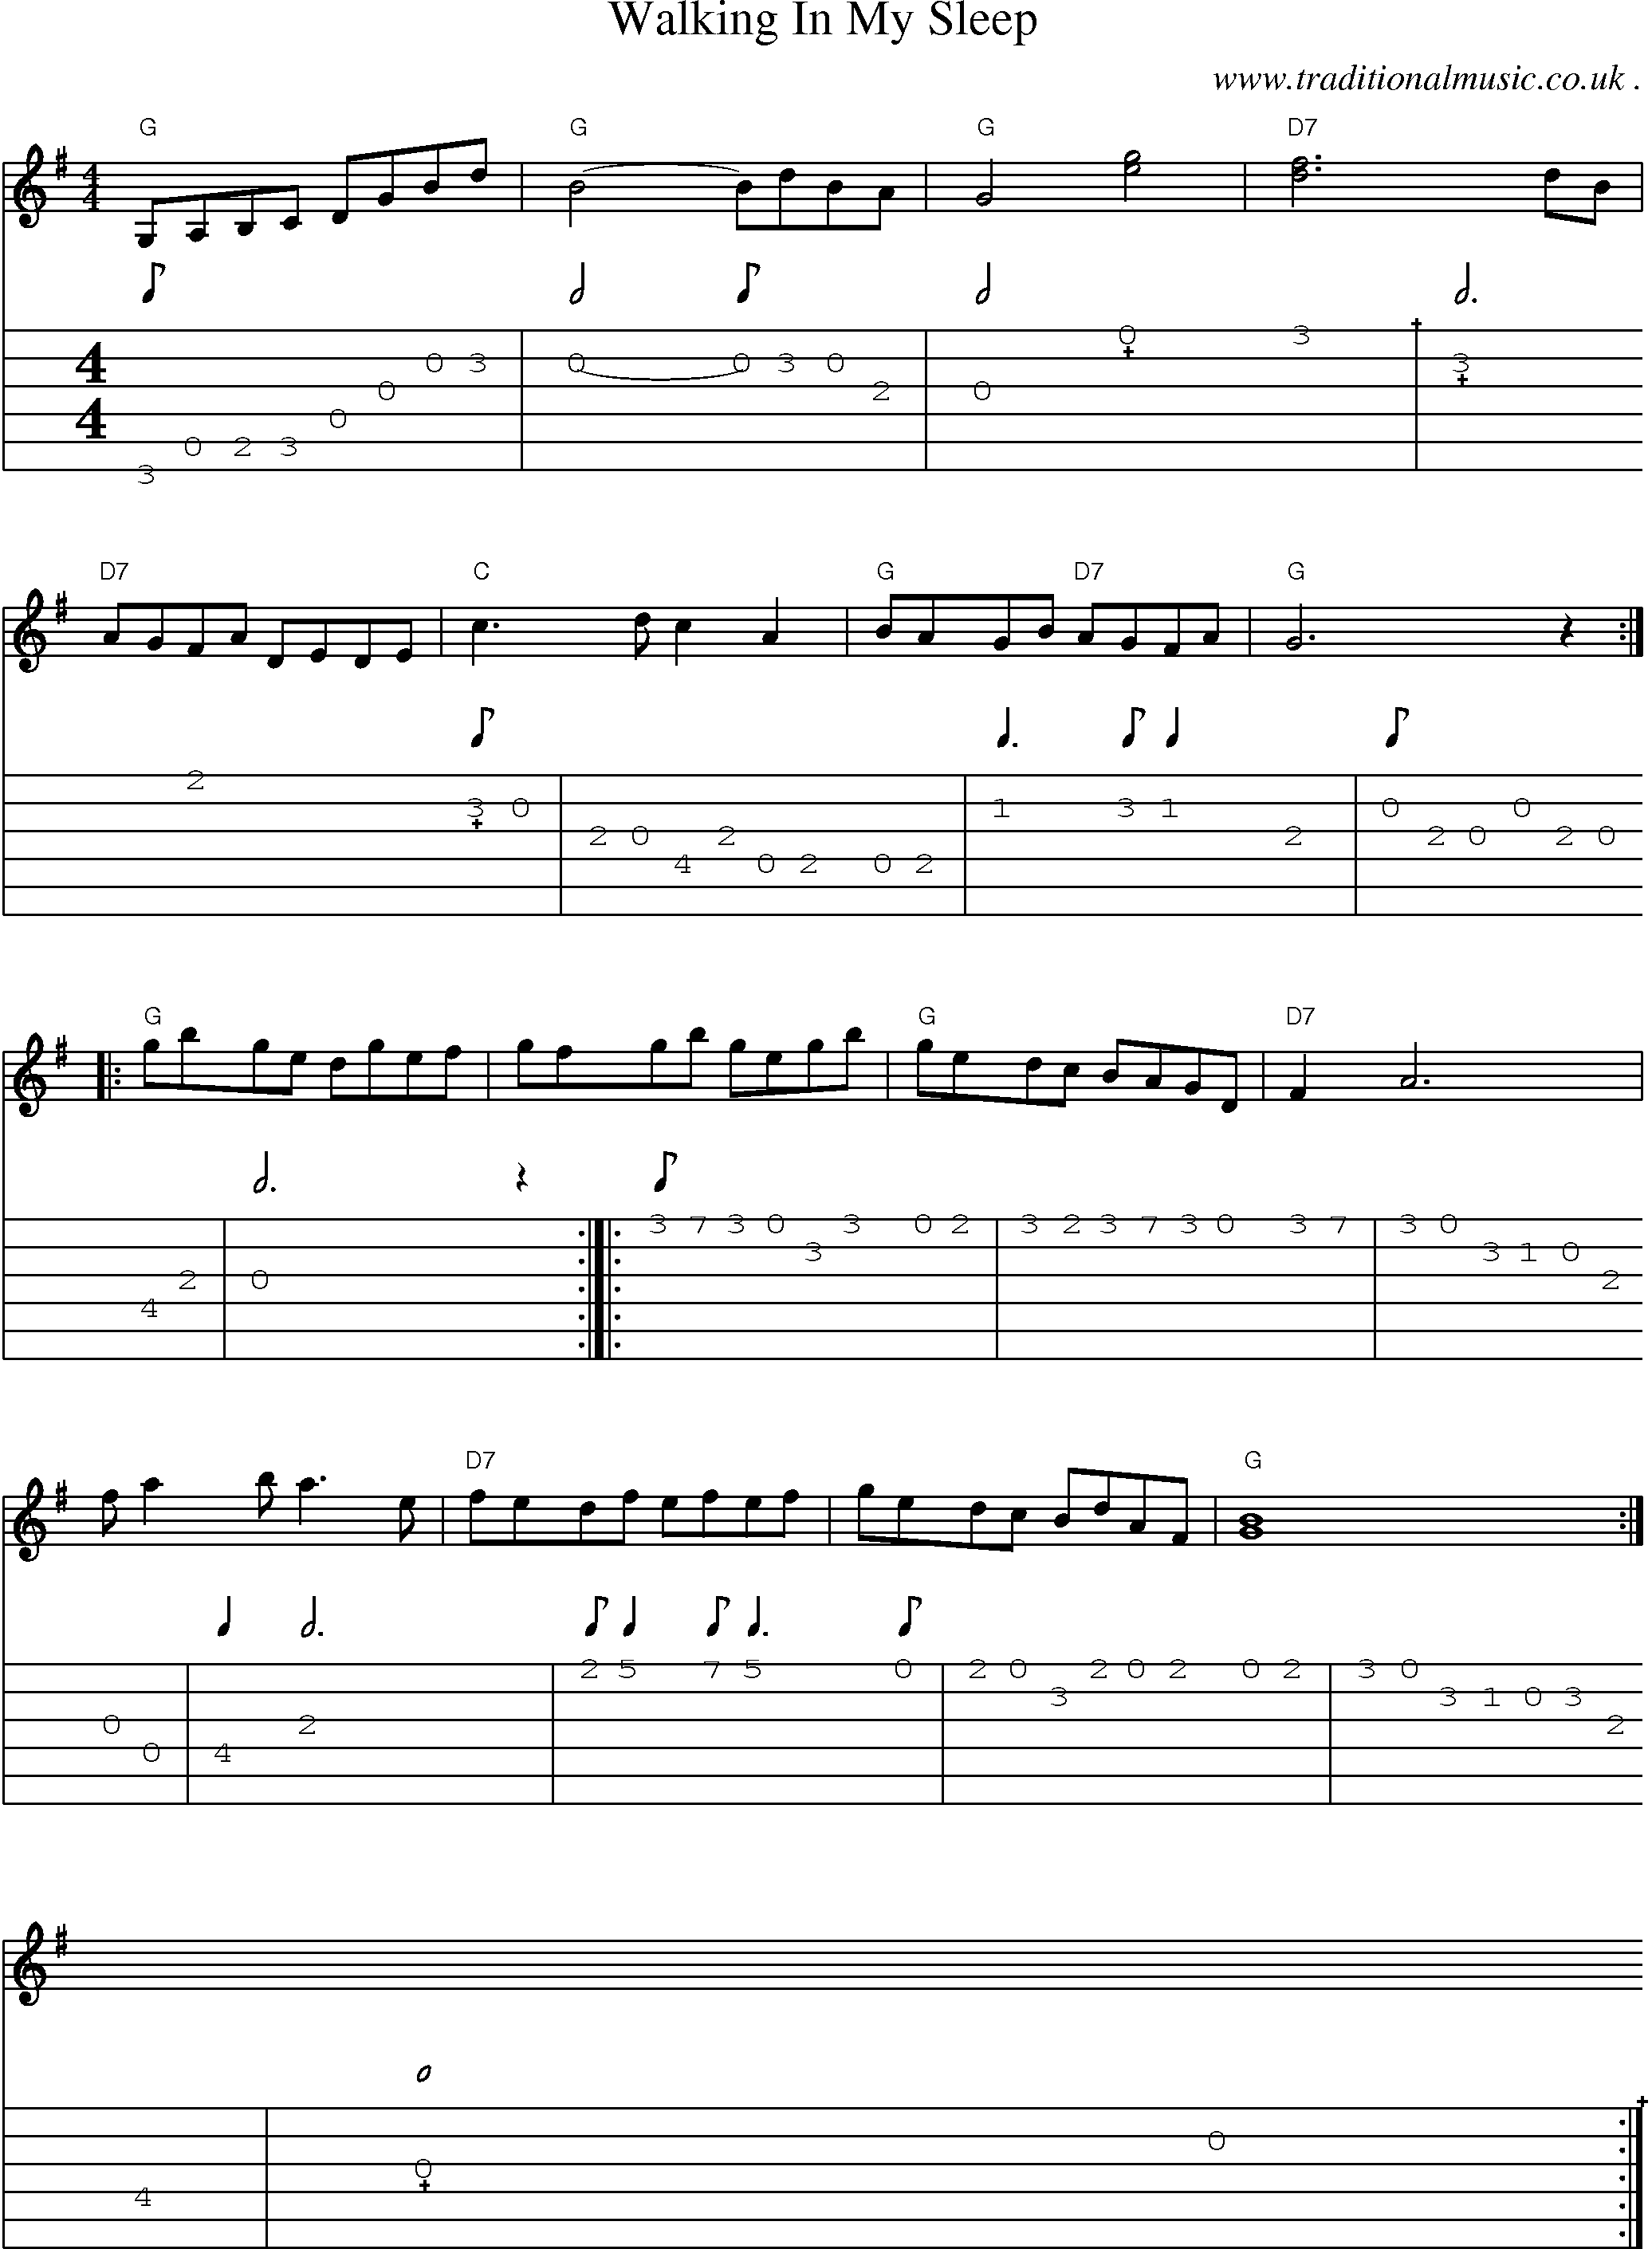 Music Score and Guitar Tabs for Walking In My Sleep